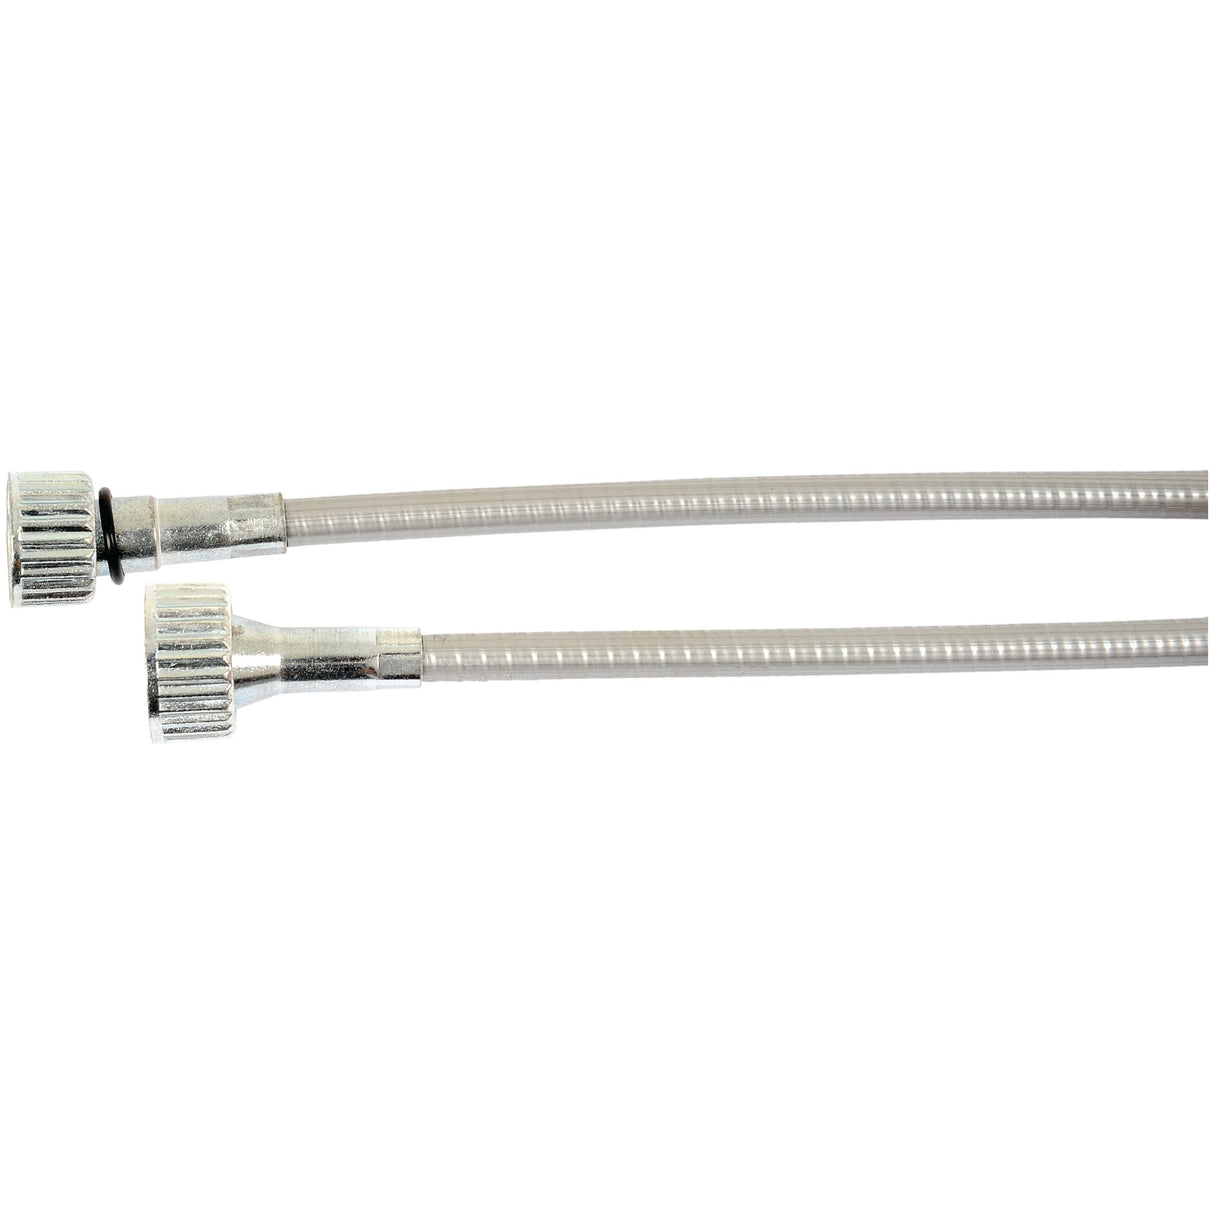 Drive Cable - Length: 1300mm, Outer cable length: 1278mm.
 - S.67310 - Farming Parts